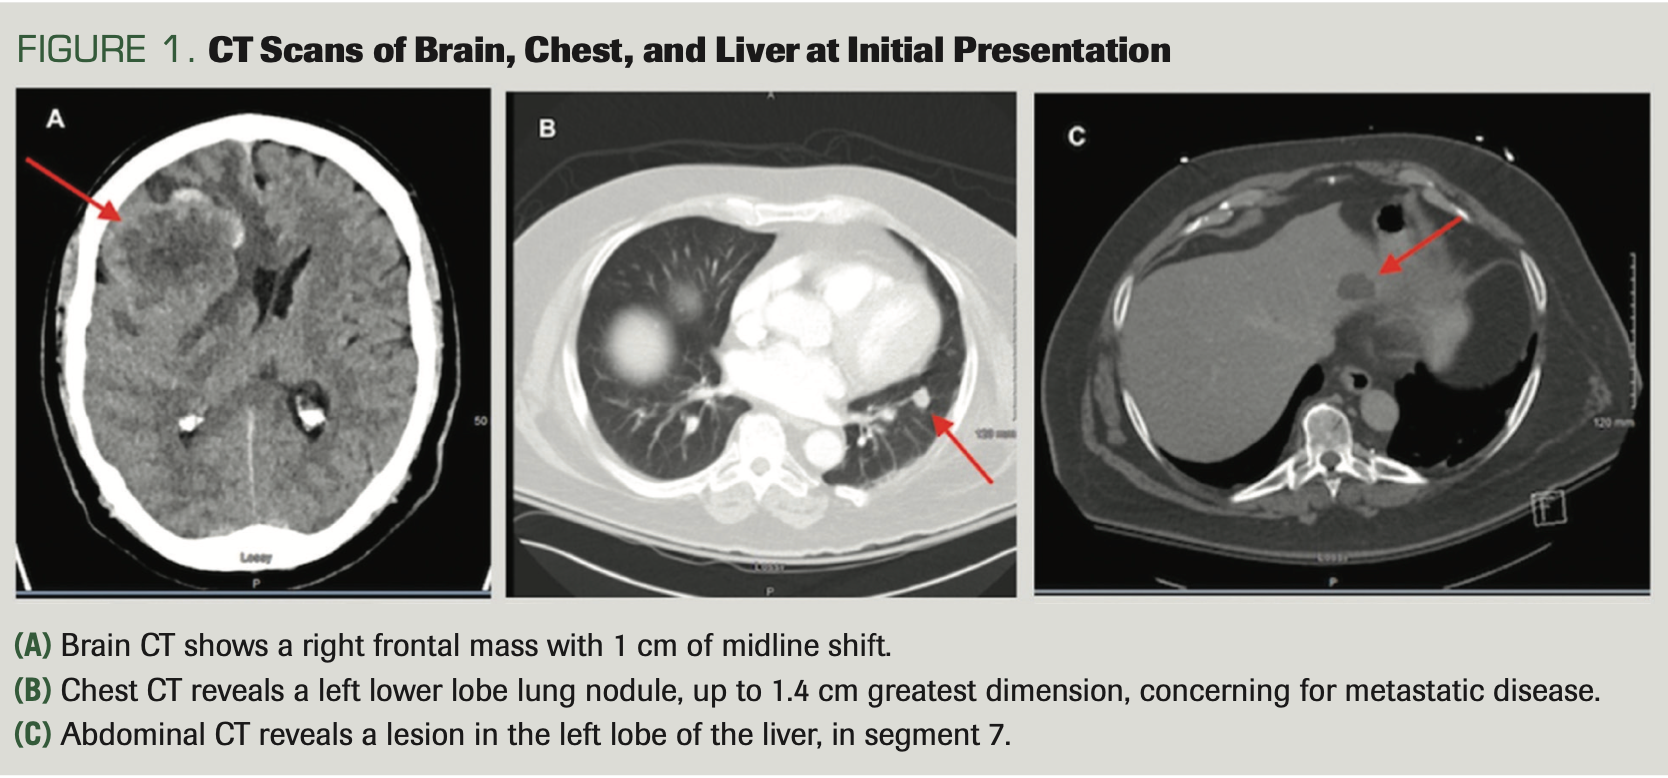 FIGURE 1. CT Scans of Brain, Chest, and Liver at Initial Presentation